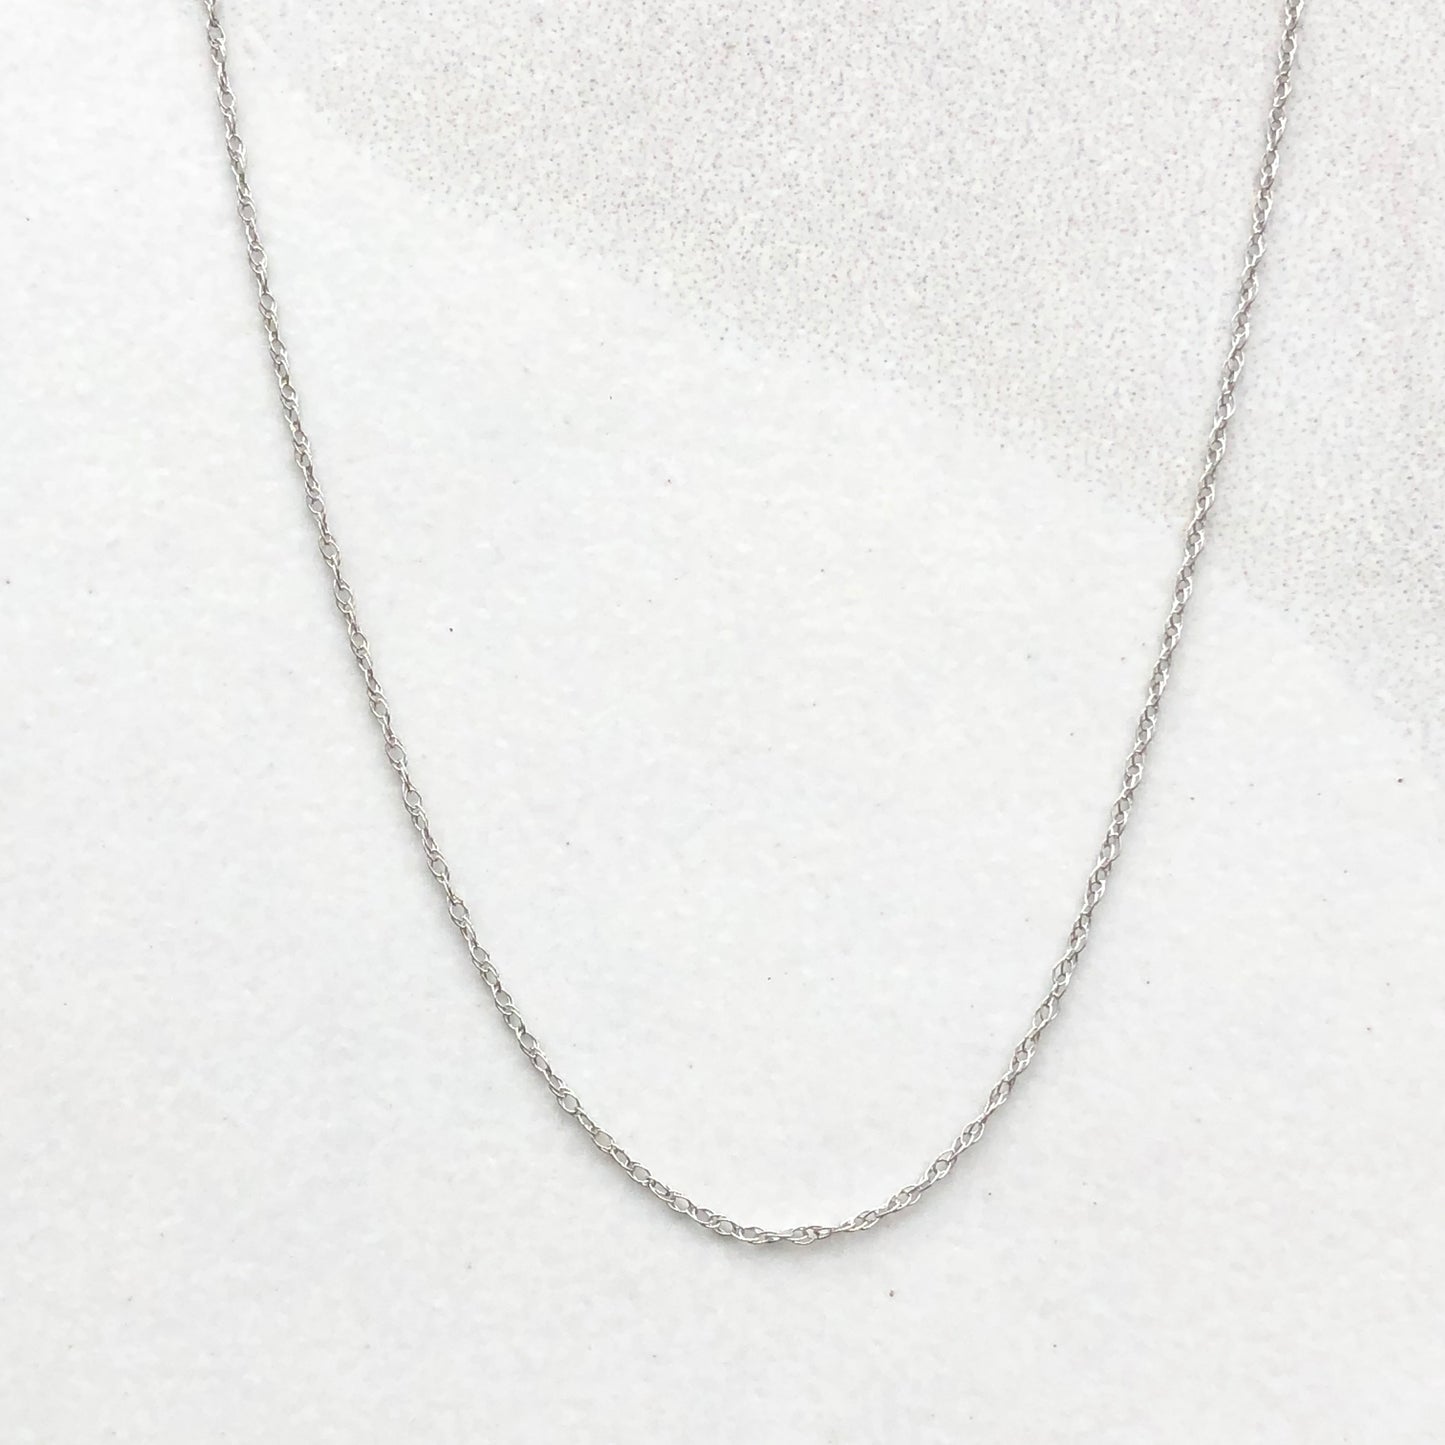 14KT White Gold Cable Rope Chain Necklace .5mm, 14KT White Gold Cable Rope Chain Necklace .5mm - Legacy Saint Jewelry